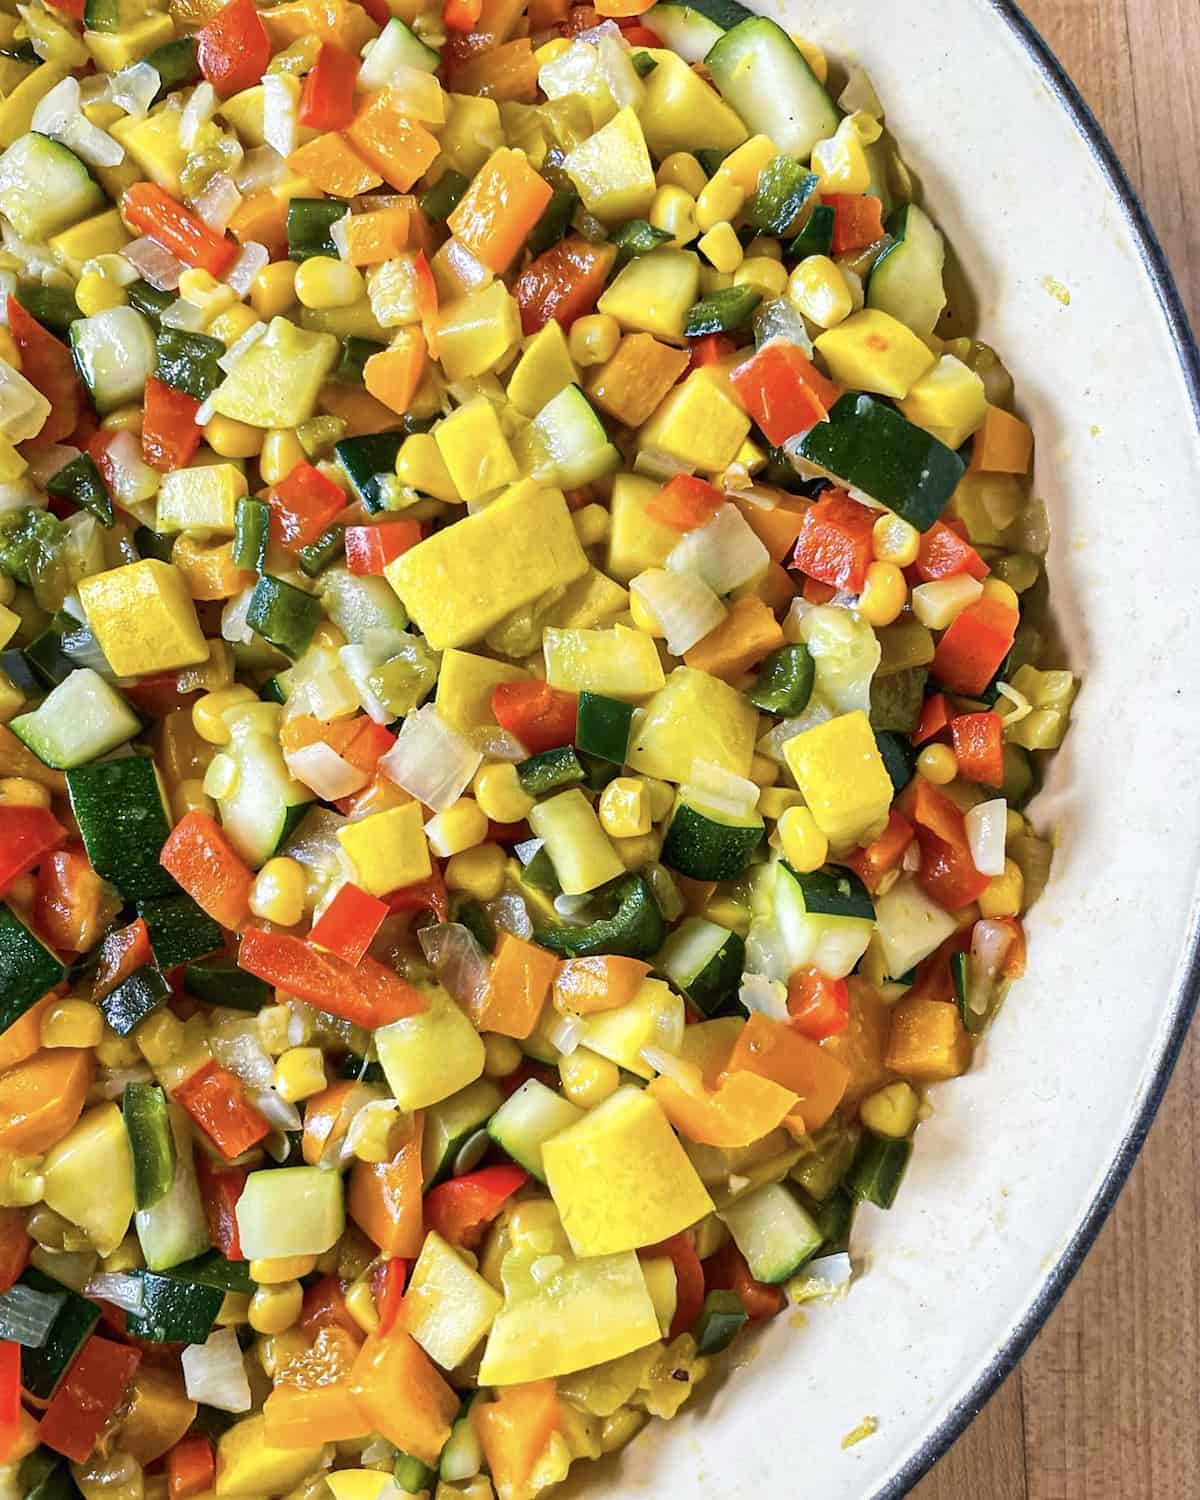 A mixture of diced onions, poblano peppers, bell peppers, zucchini, yellow squash, corn, and green chiles that have been cooked until soft in a skillet.